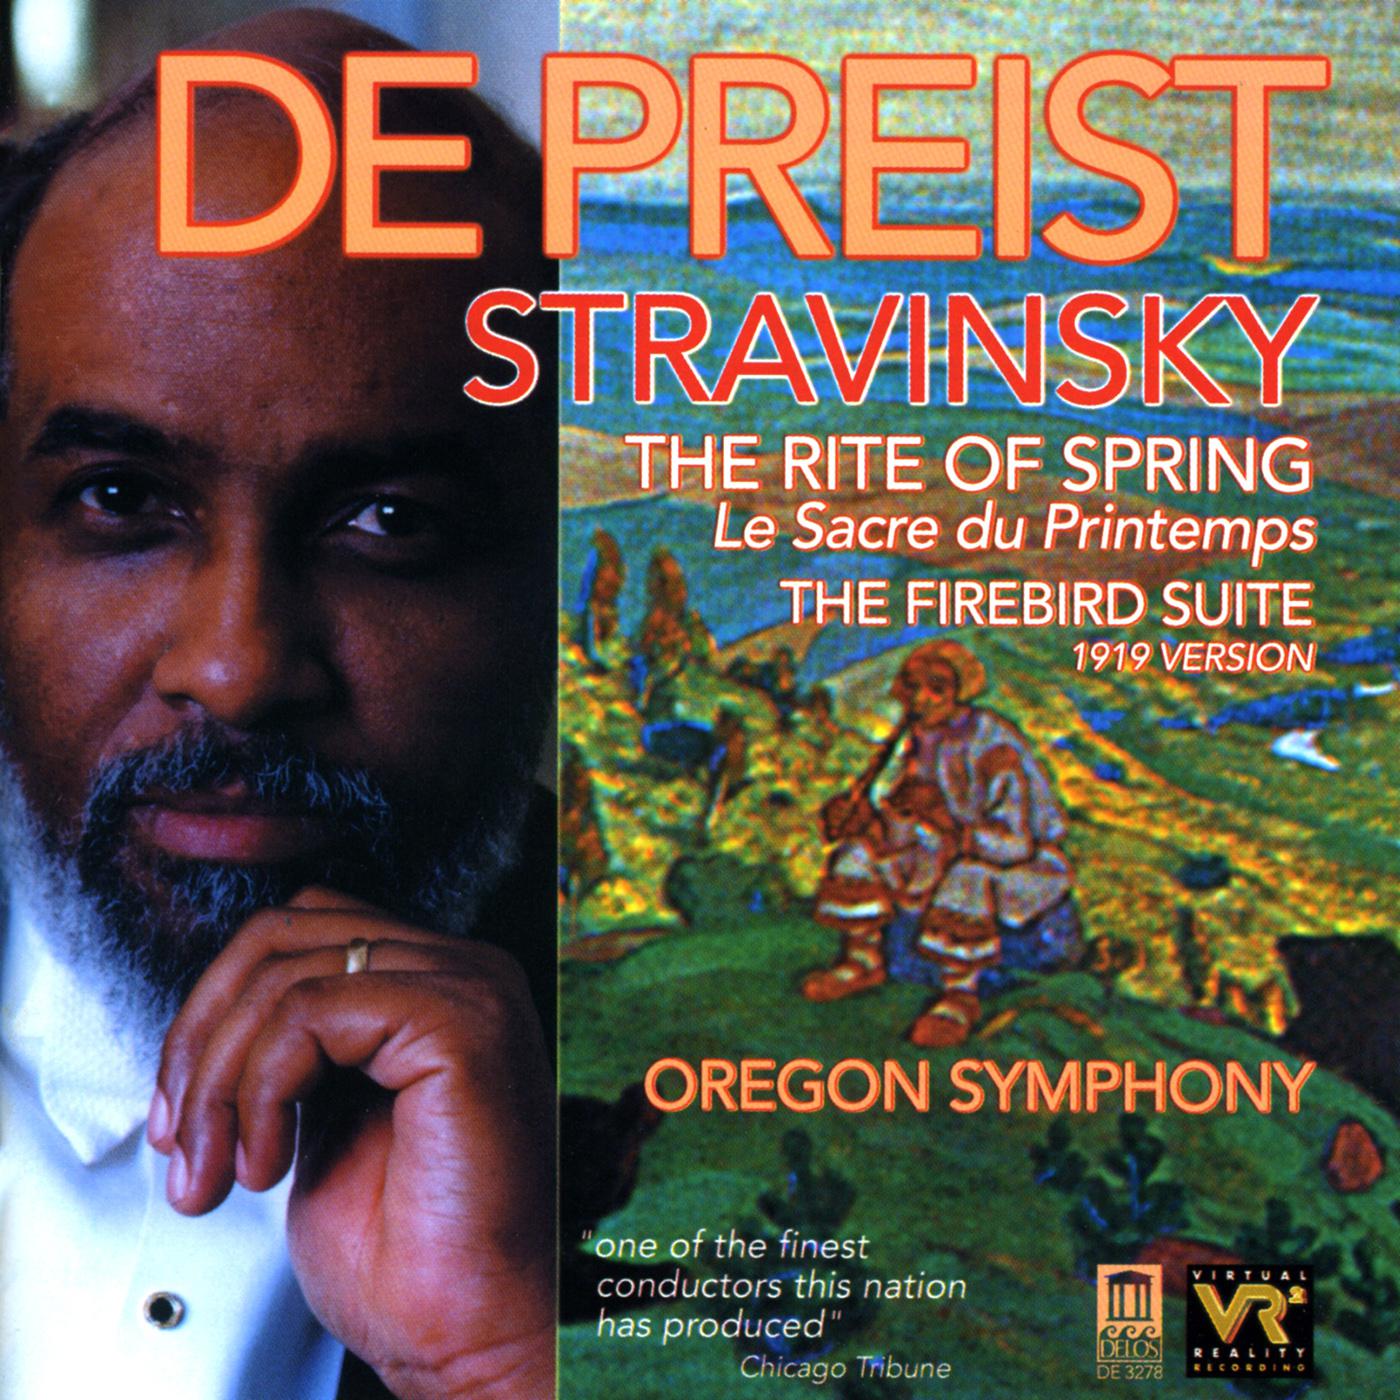 Oregon Symphony - Le sacre du printemps (The Rite of Spring):Part I: Adoration of the Earth: Procession of the Sage